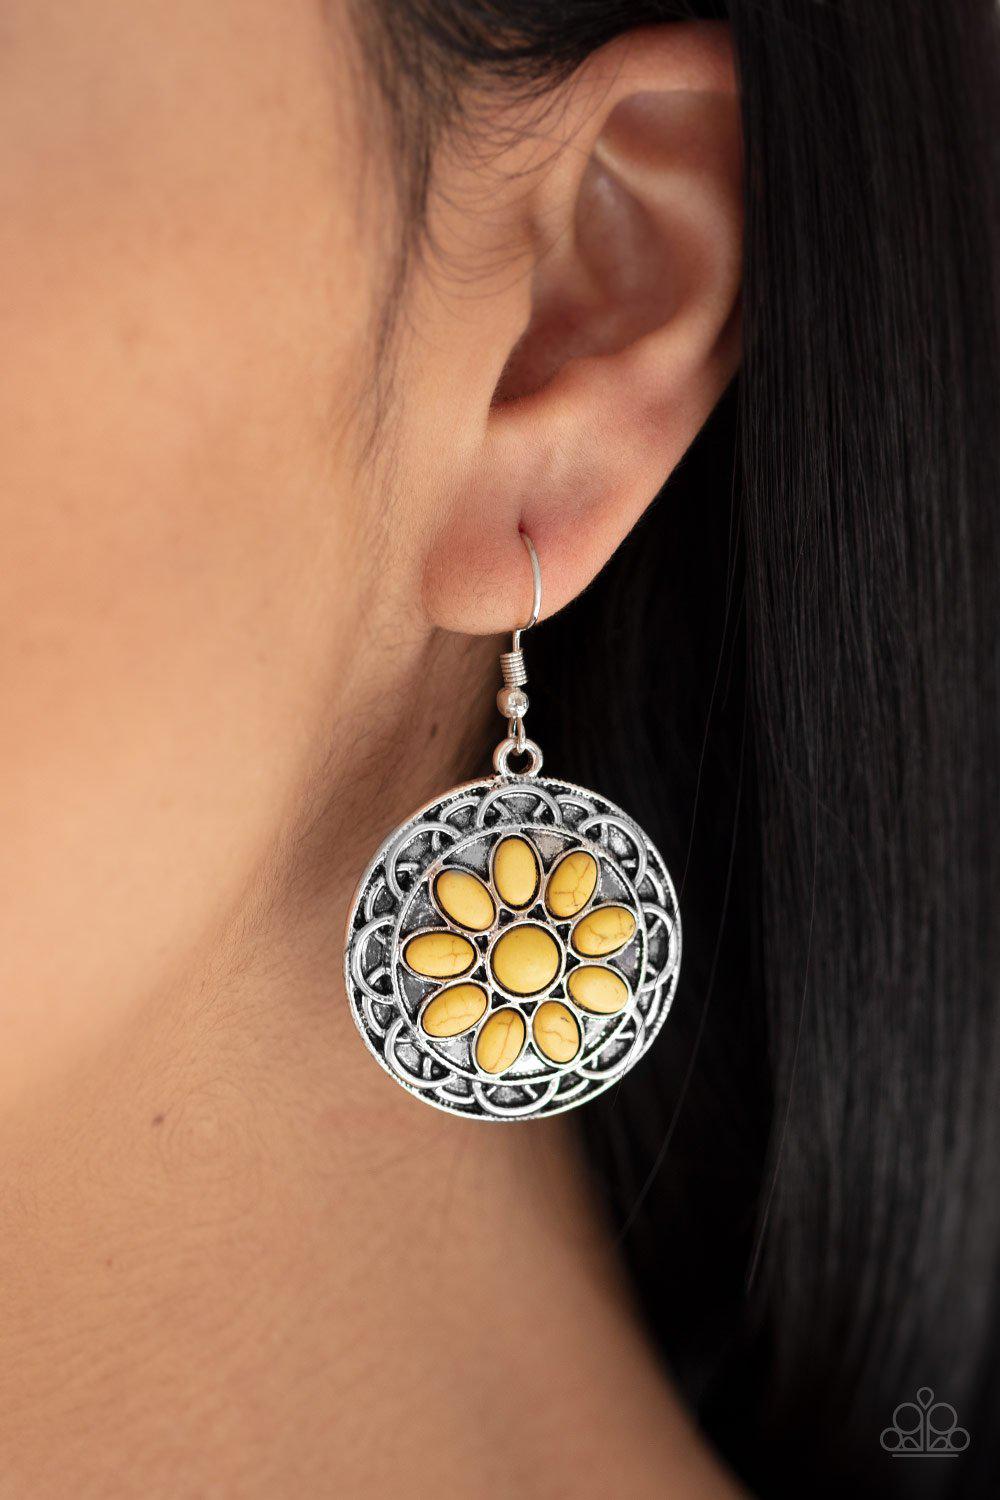 Mesa Oasis Yellow Stone Flower Earrings - Paparazzi Accessories-CarasShop.com - $5 Jewelry by Cara Jewels